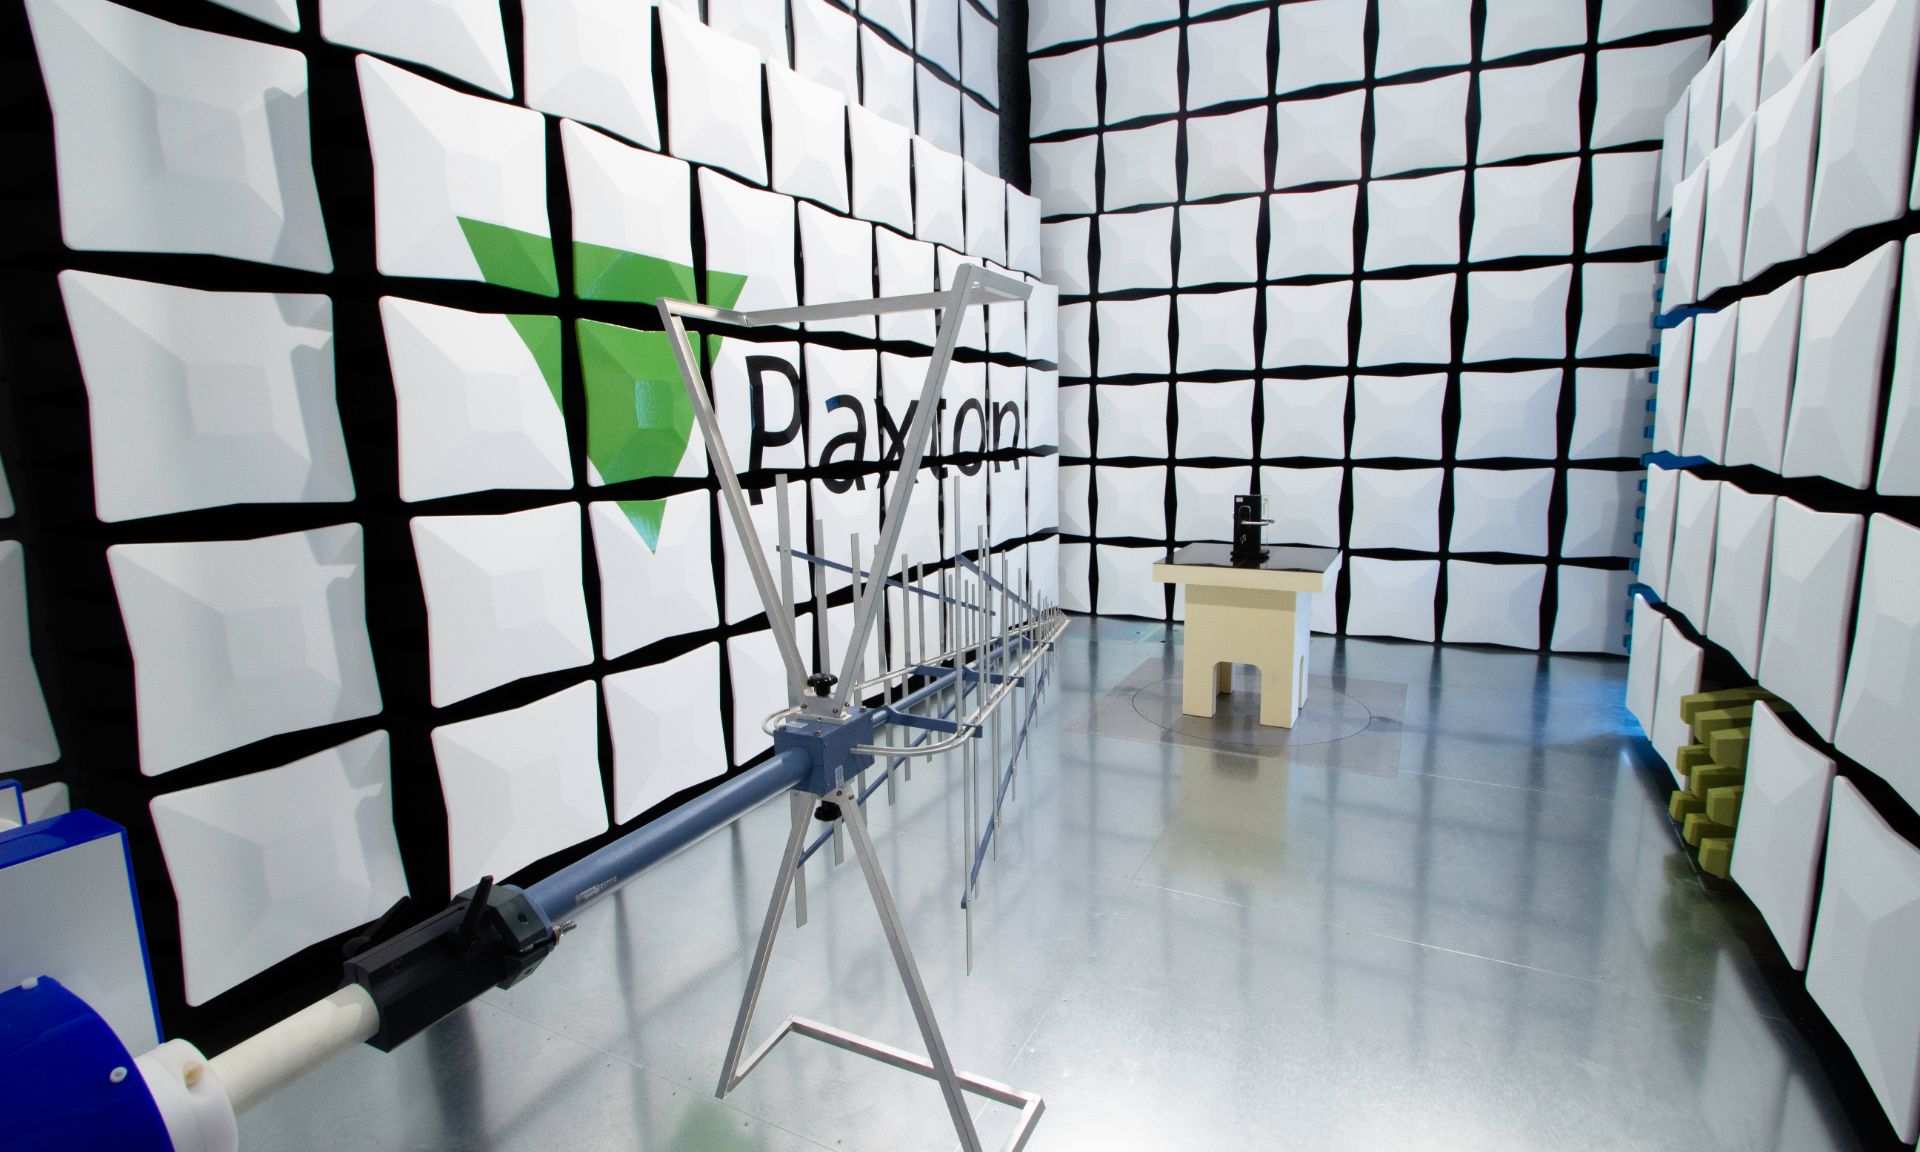 Global technology company, Paxton, opens new in-house test facility